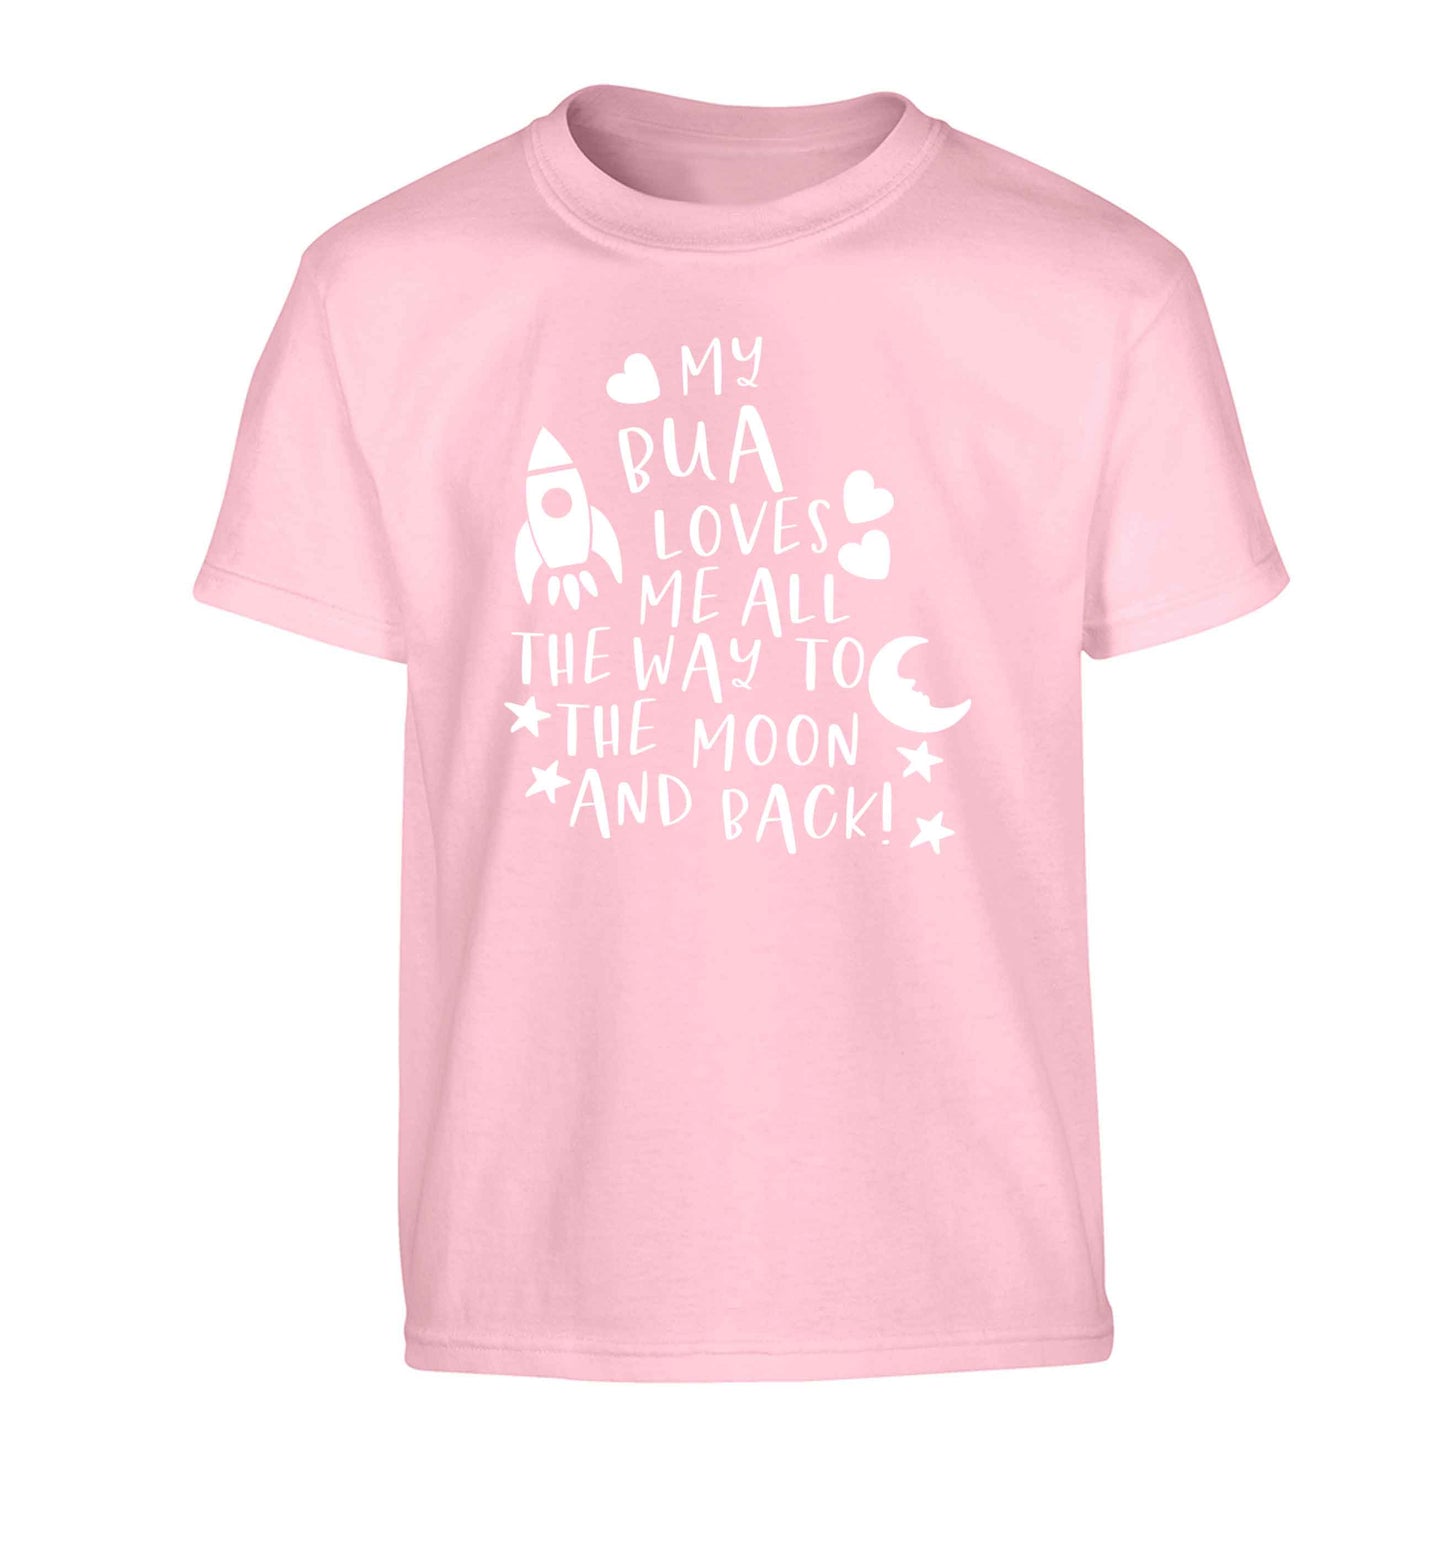 My bua loves me all they way to the moon and back Children's light pink Tshirt 12-13 Years